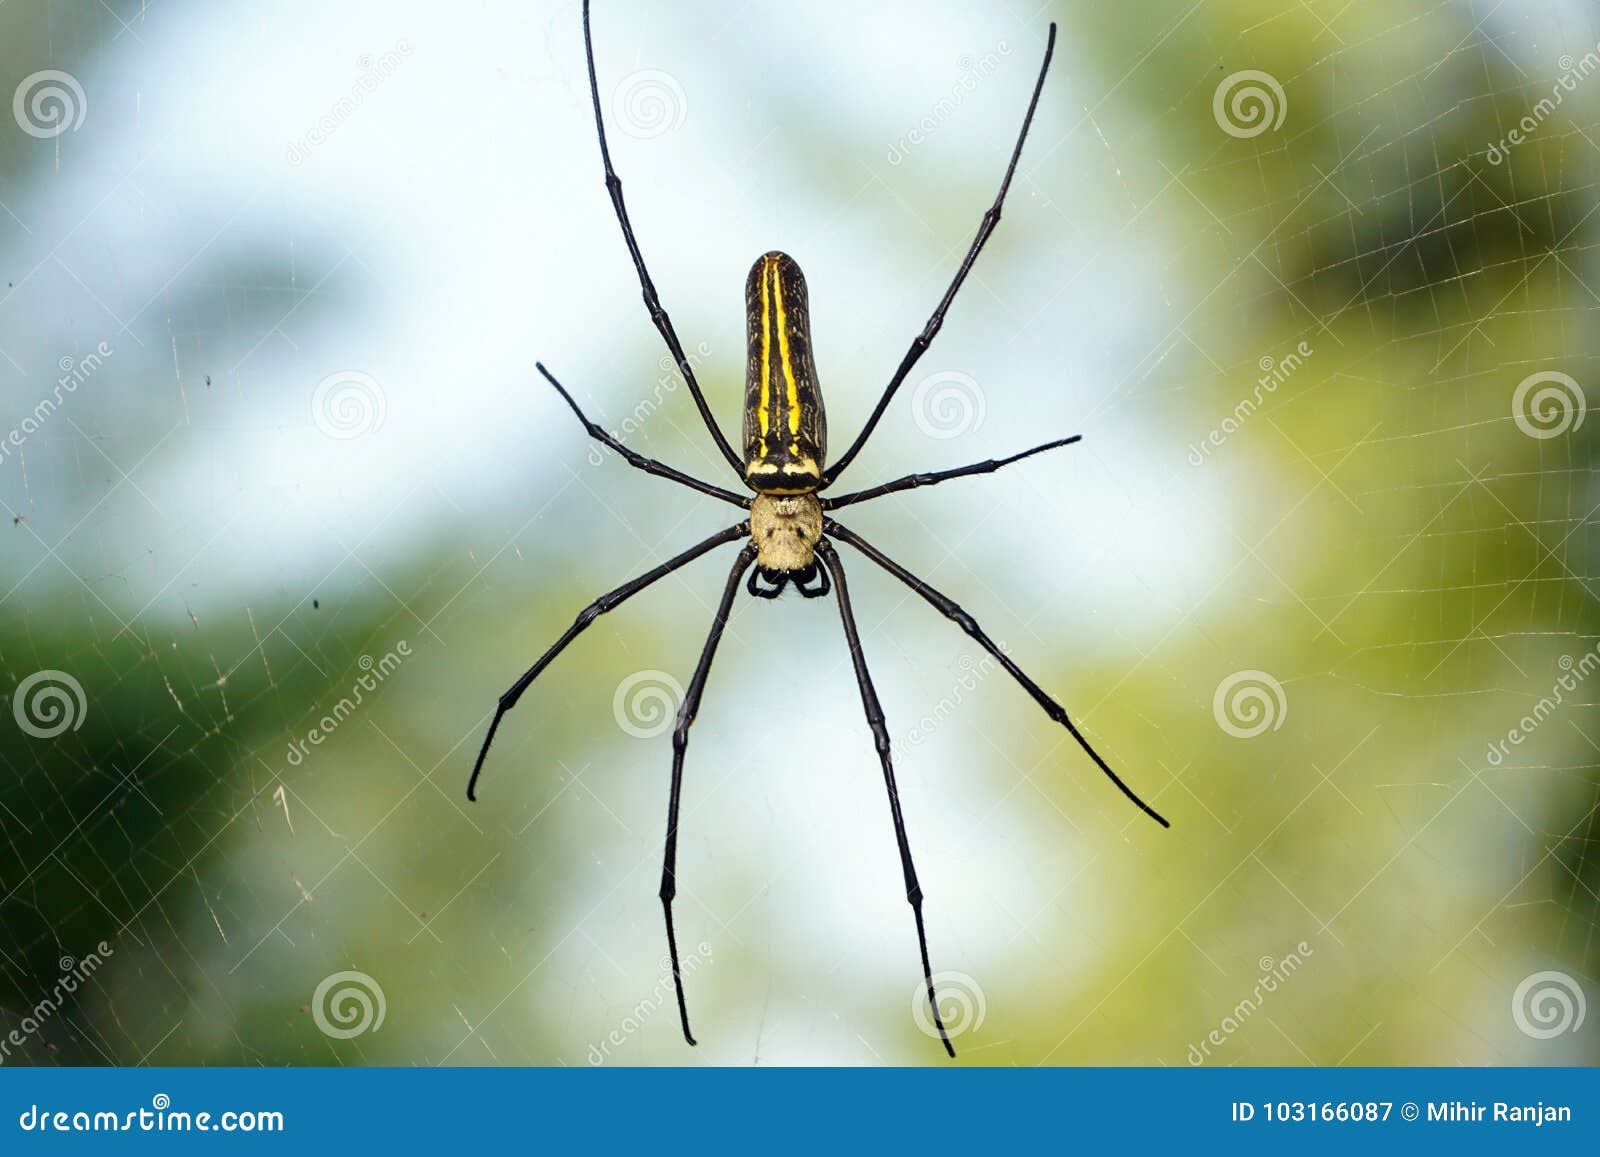 A Giant Wood Spider in His Stock Image - Image of ehight, longjawed: 103166087